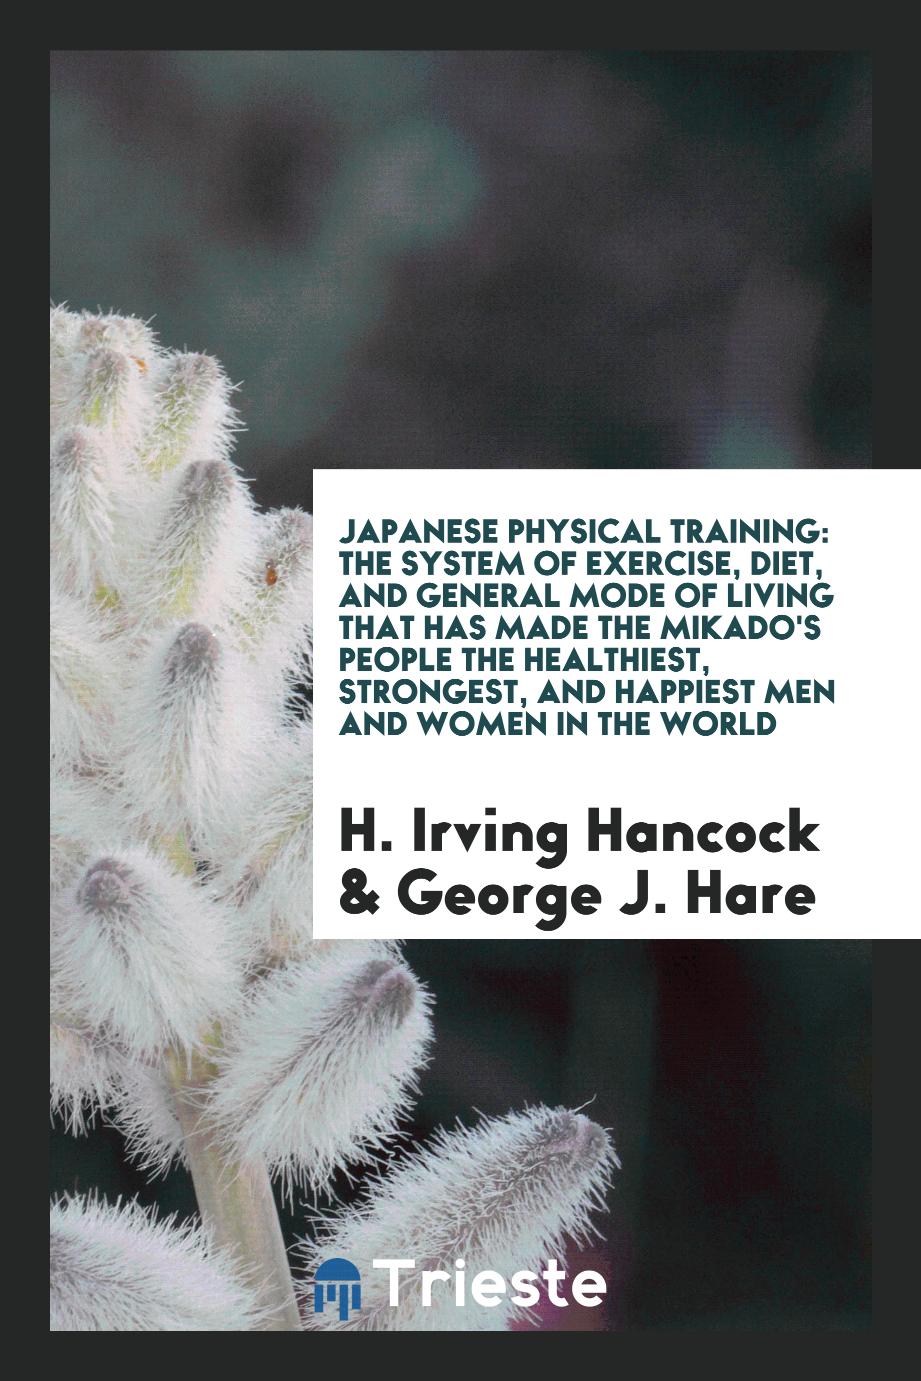 Japanese Physical Training: The System of Exercise, Diet, and General Mode of Living That Has Made the Mikado's People the Healthiest, Strongest, and Happiest Men and Women in the World